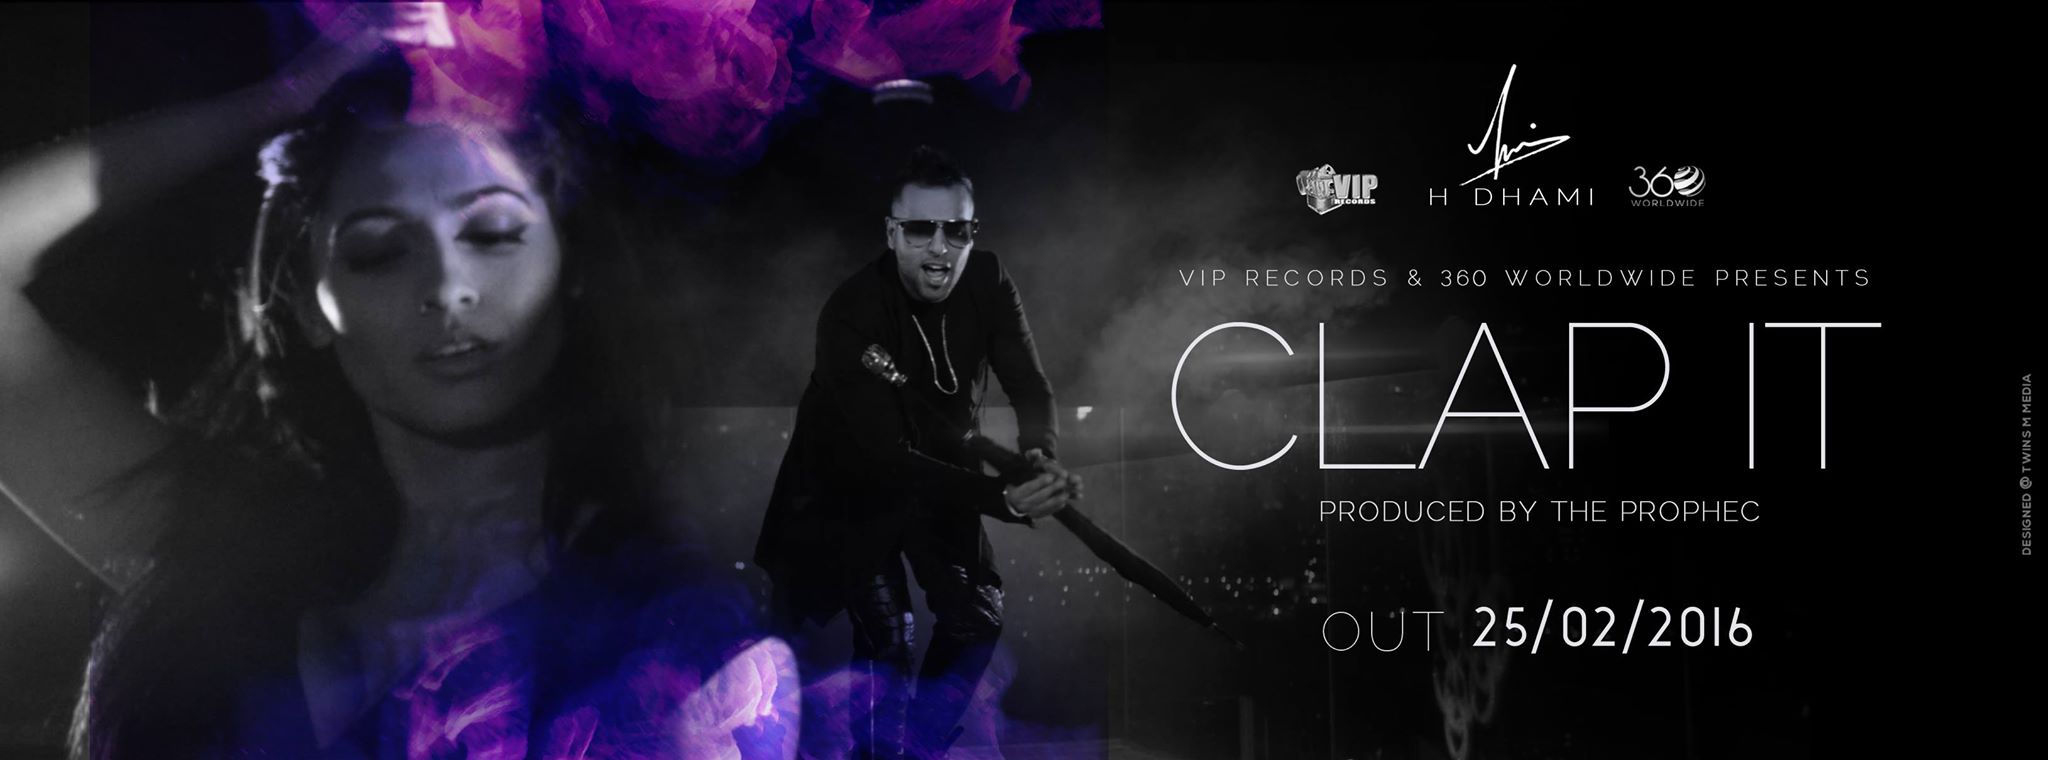 Photo of H Dhami ft The PropheC – Clap It (Full Video)